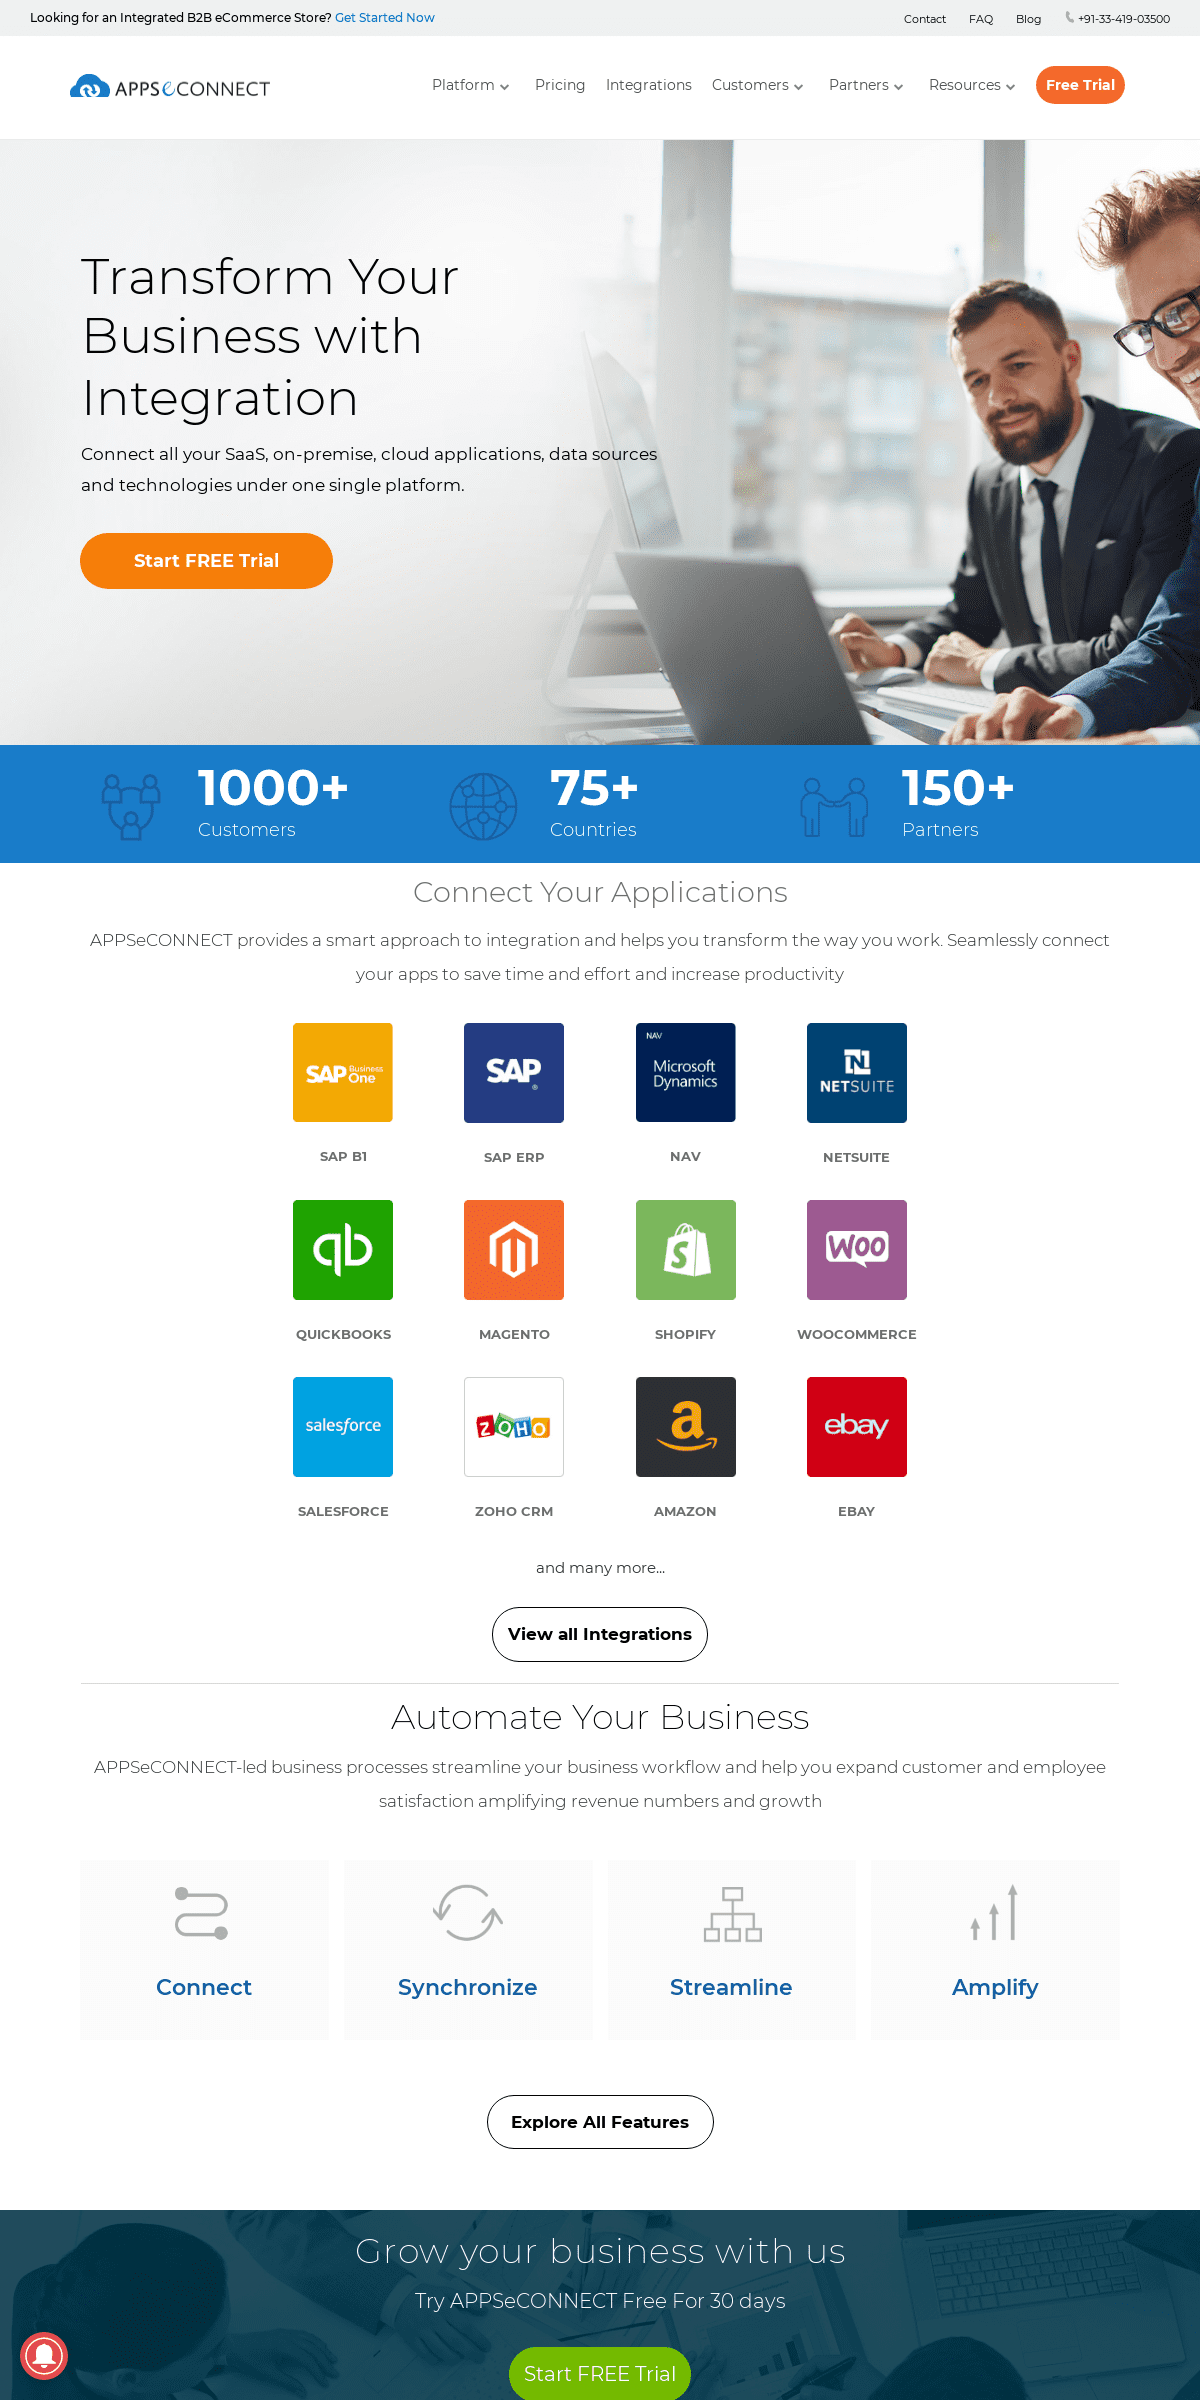 A complete backup of appseconnect.com